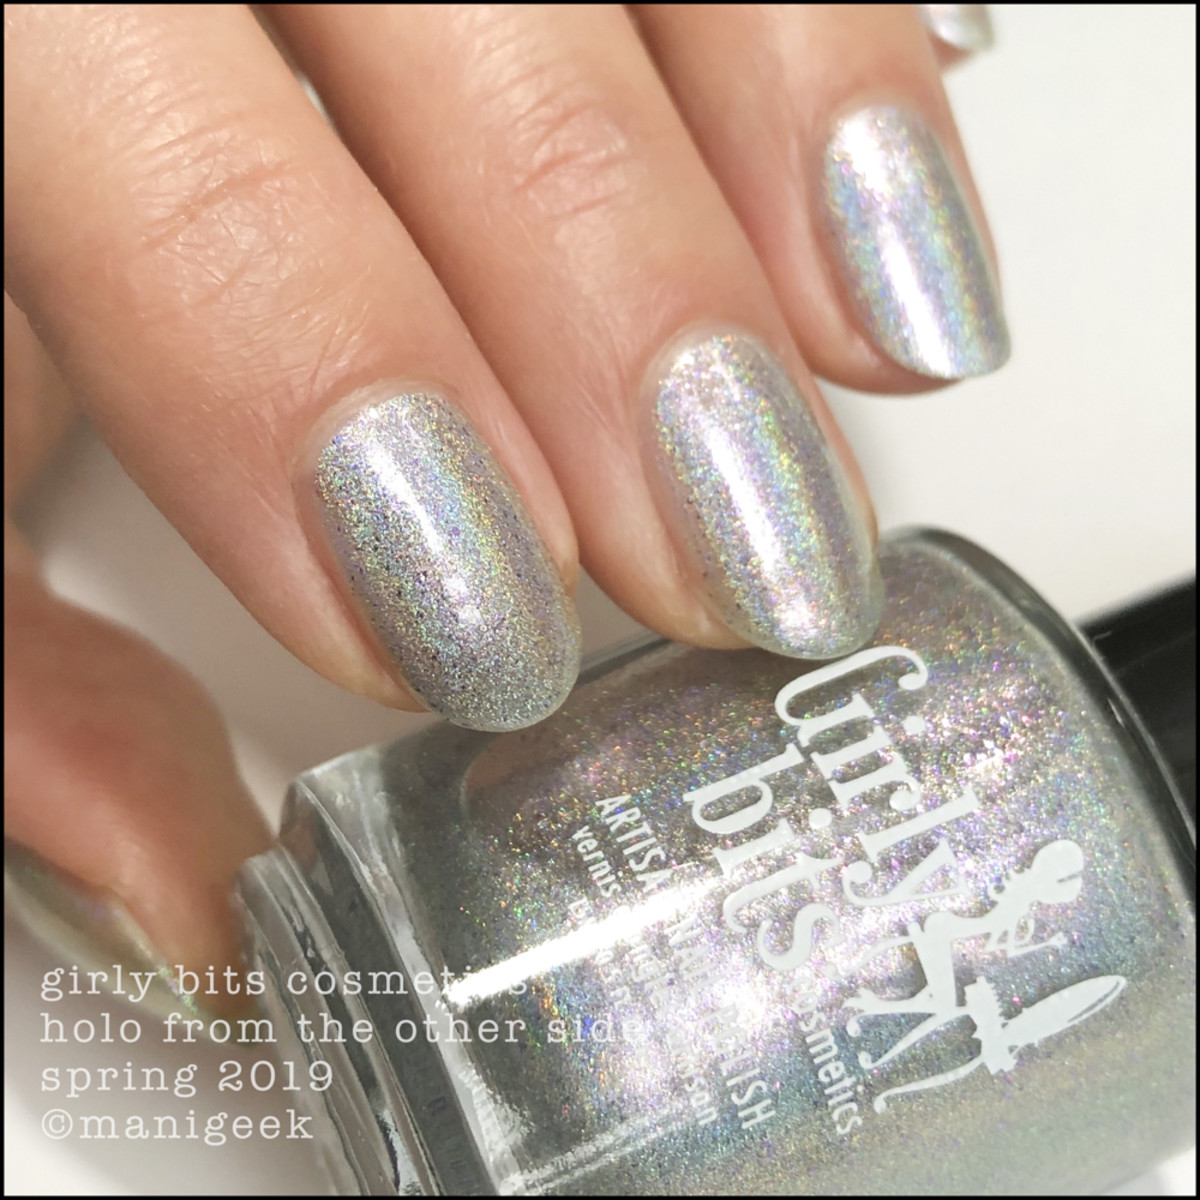 Girly Bits Holo from the Other Side 2 - Girly Bits Cosmetics Spring 2019 Collection